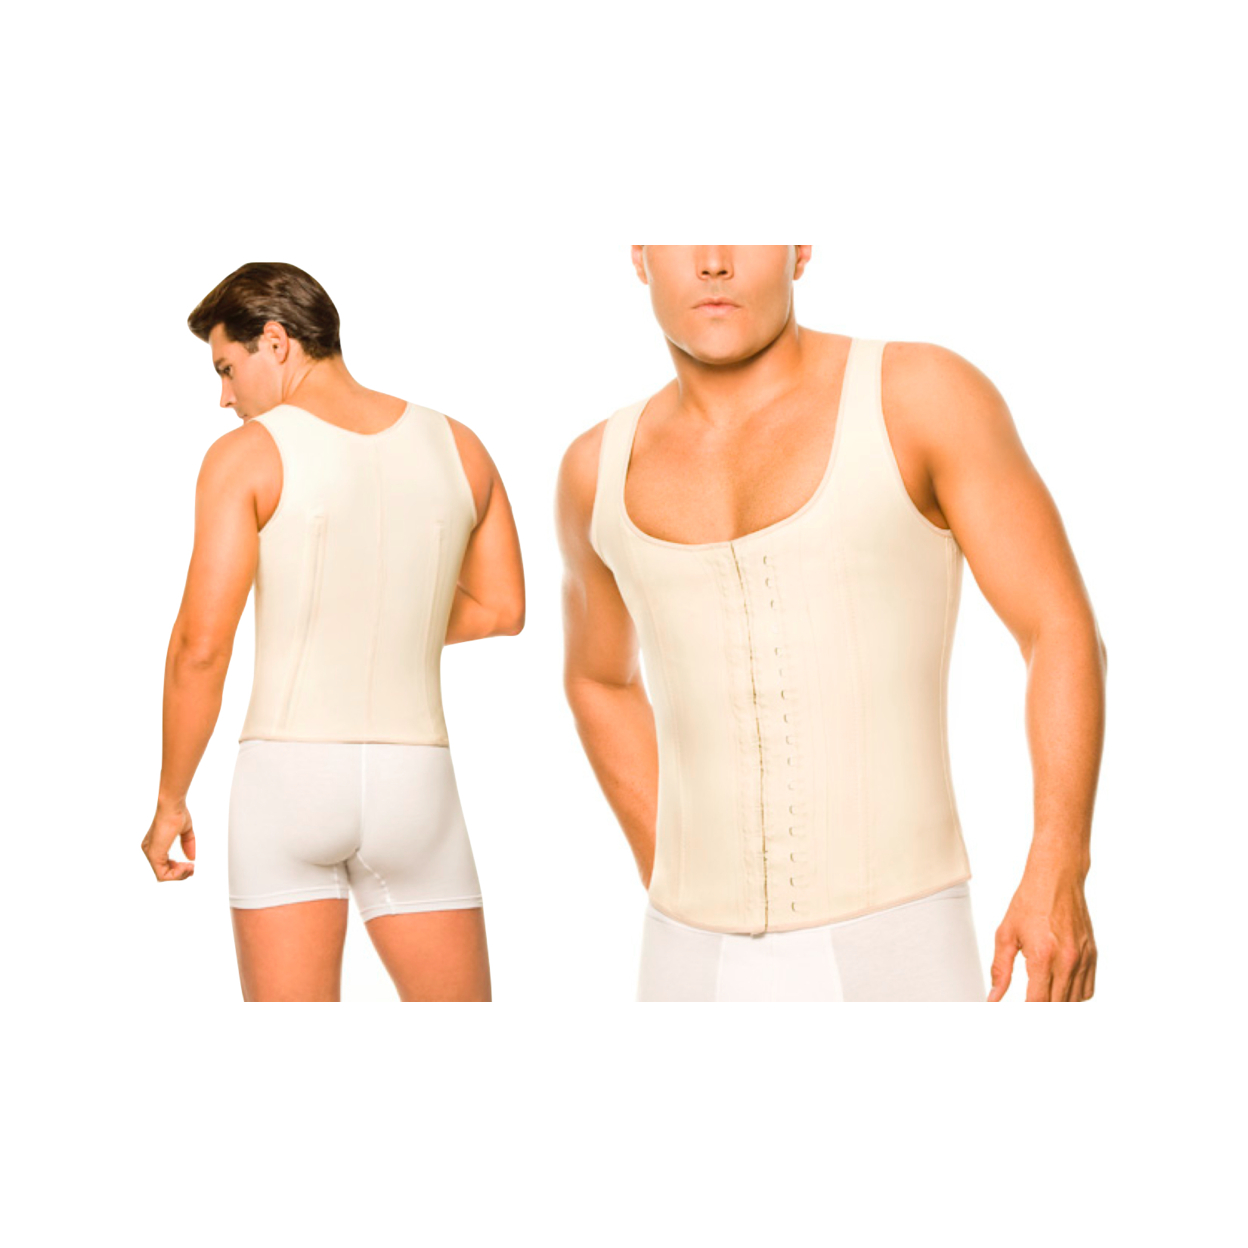 Men Waistcoat High-Compression Body Shaper In Regular And Plus Sizes - Nude, 2X